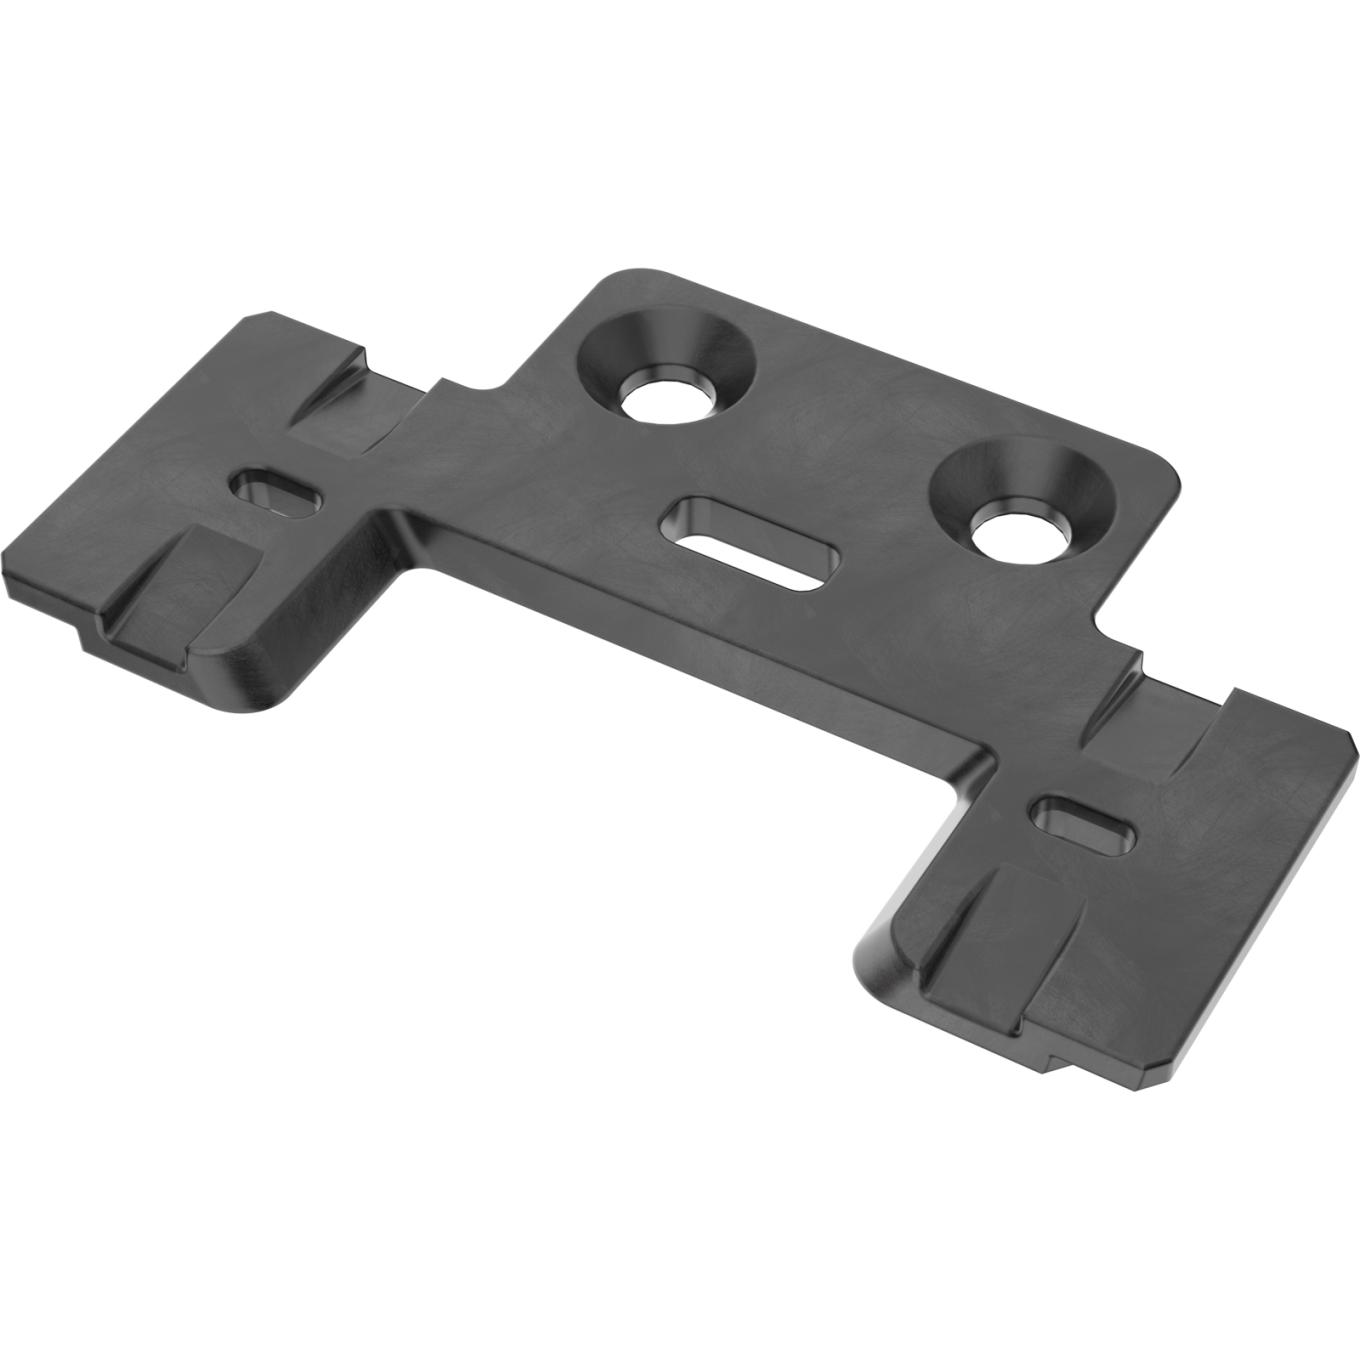 Dark gray AXIS TA9001 Wall Mount Bracket viewed from its left